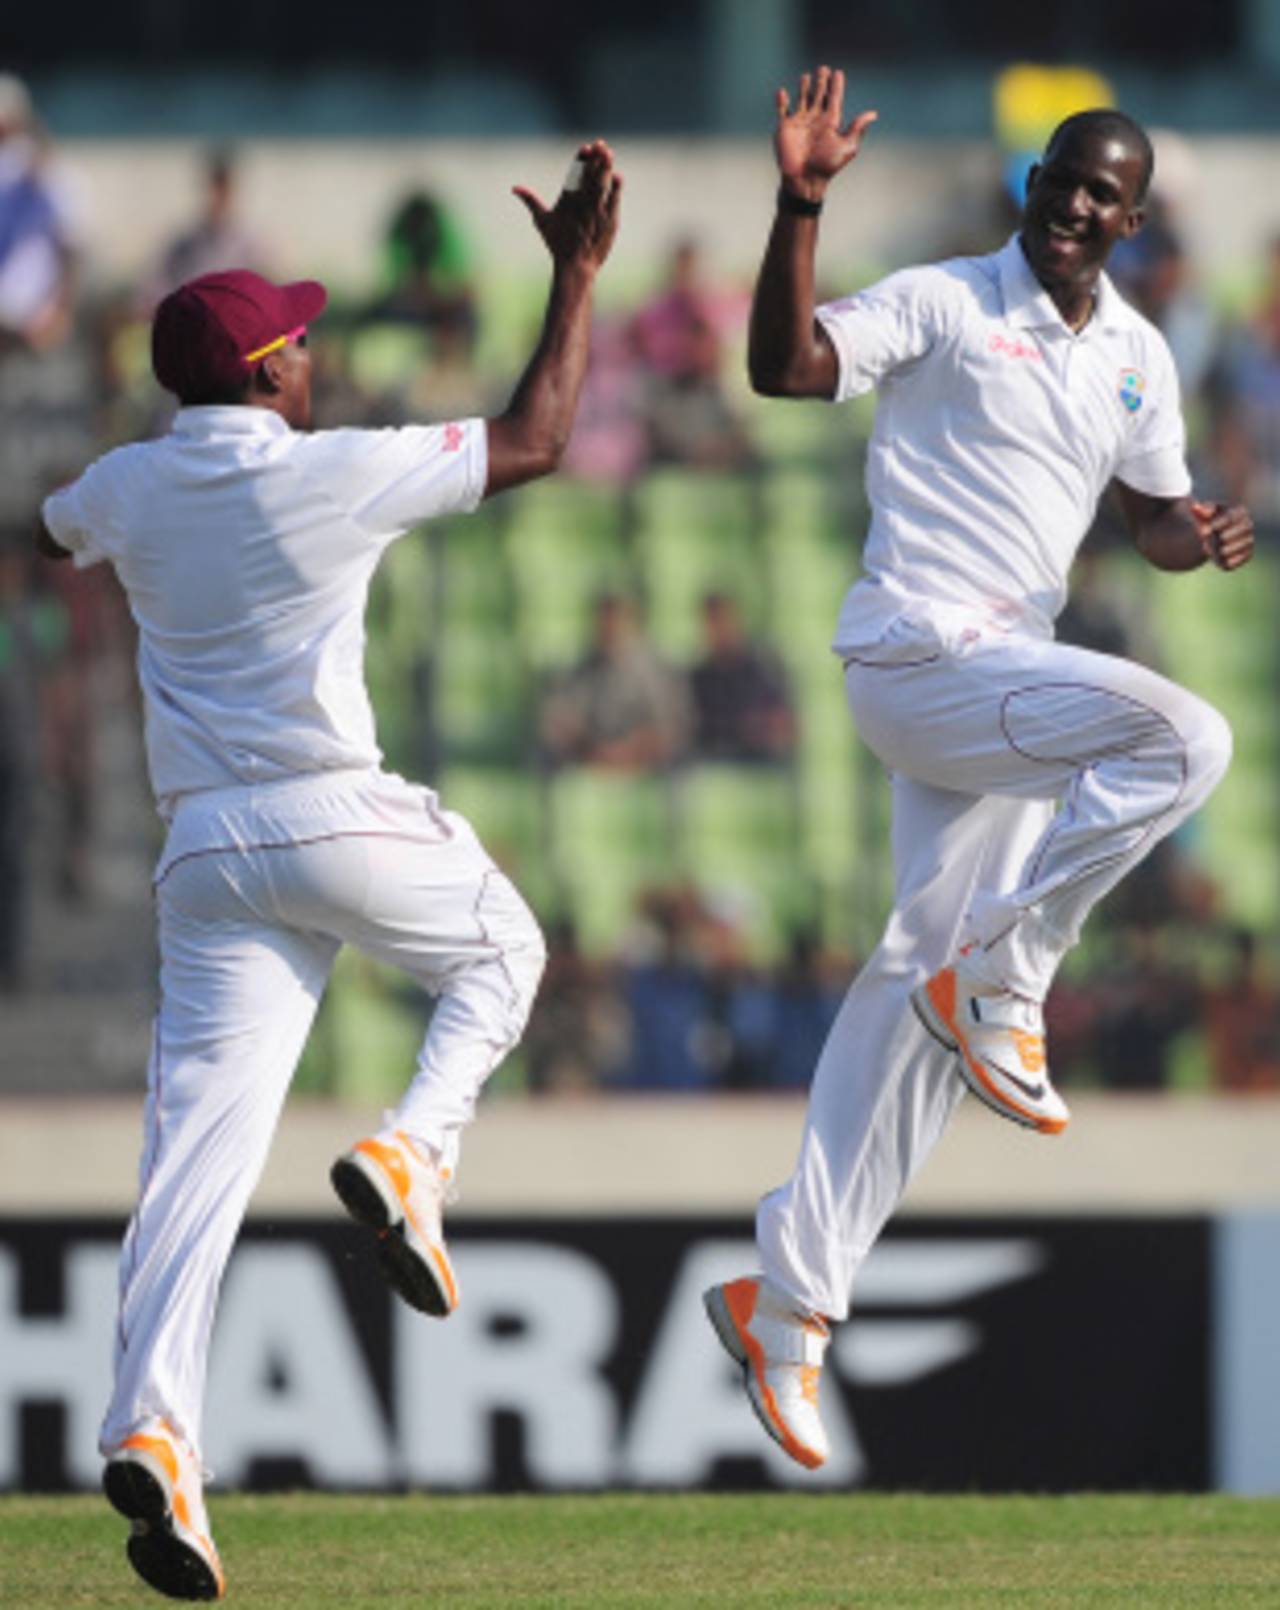 West Indies coach Ottis Gibson: "There is not a lot on the pitch, not a lot of swing. So guys running in were trying hard. They put in a lot of effort."&nbsp;&nbsp;&bull;&nbsp;&nbsp;AFP